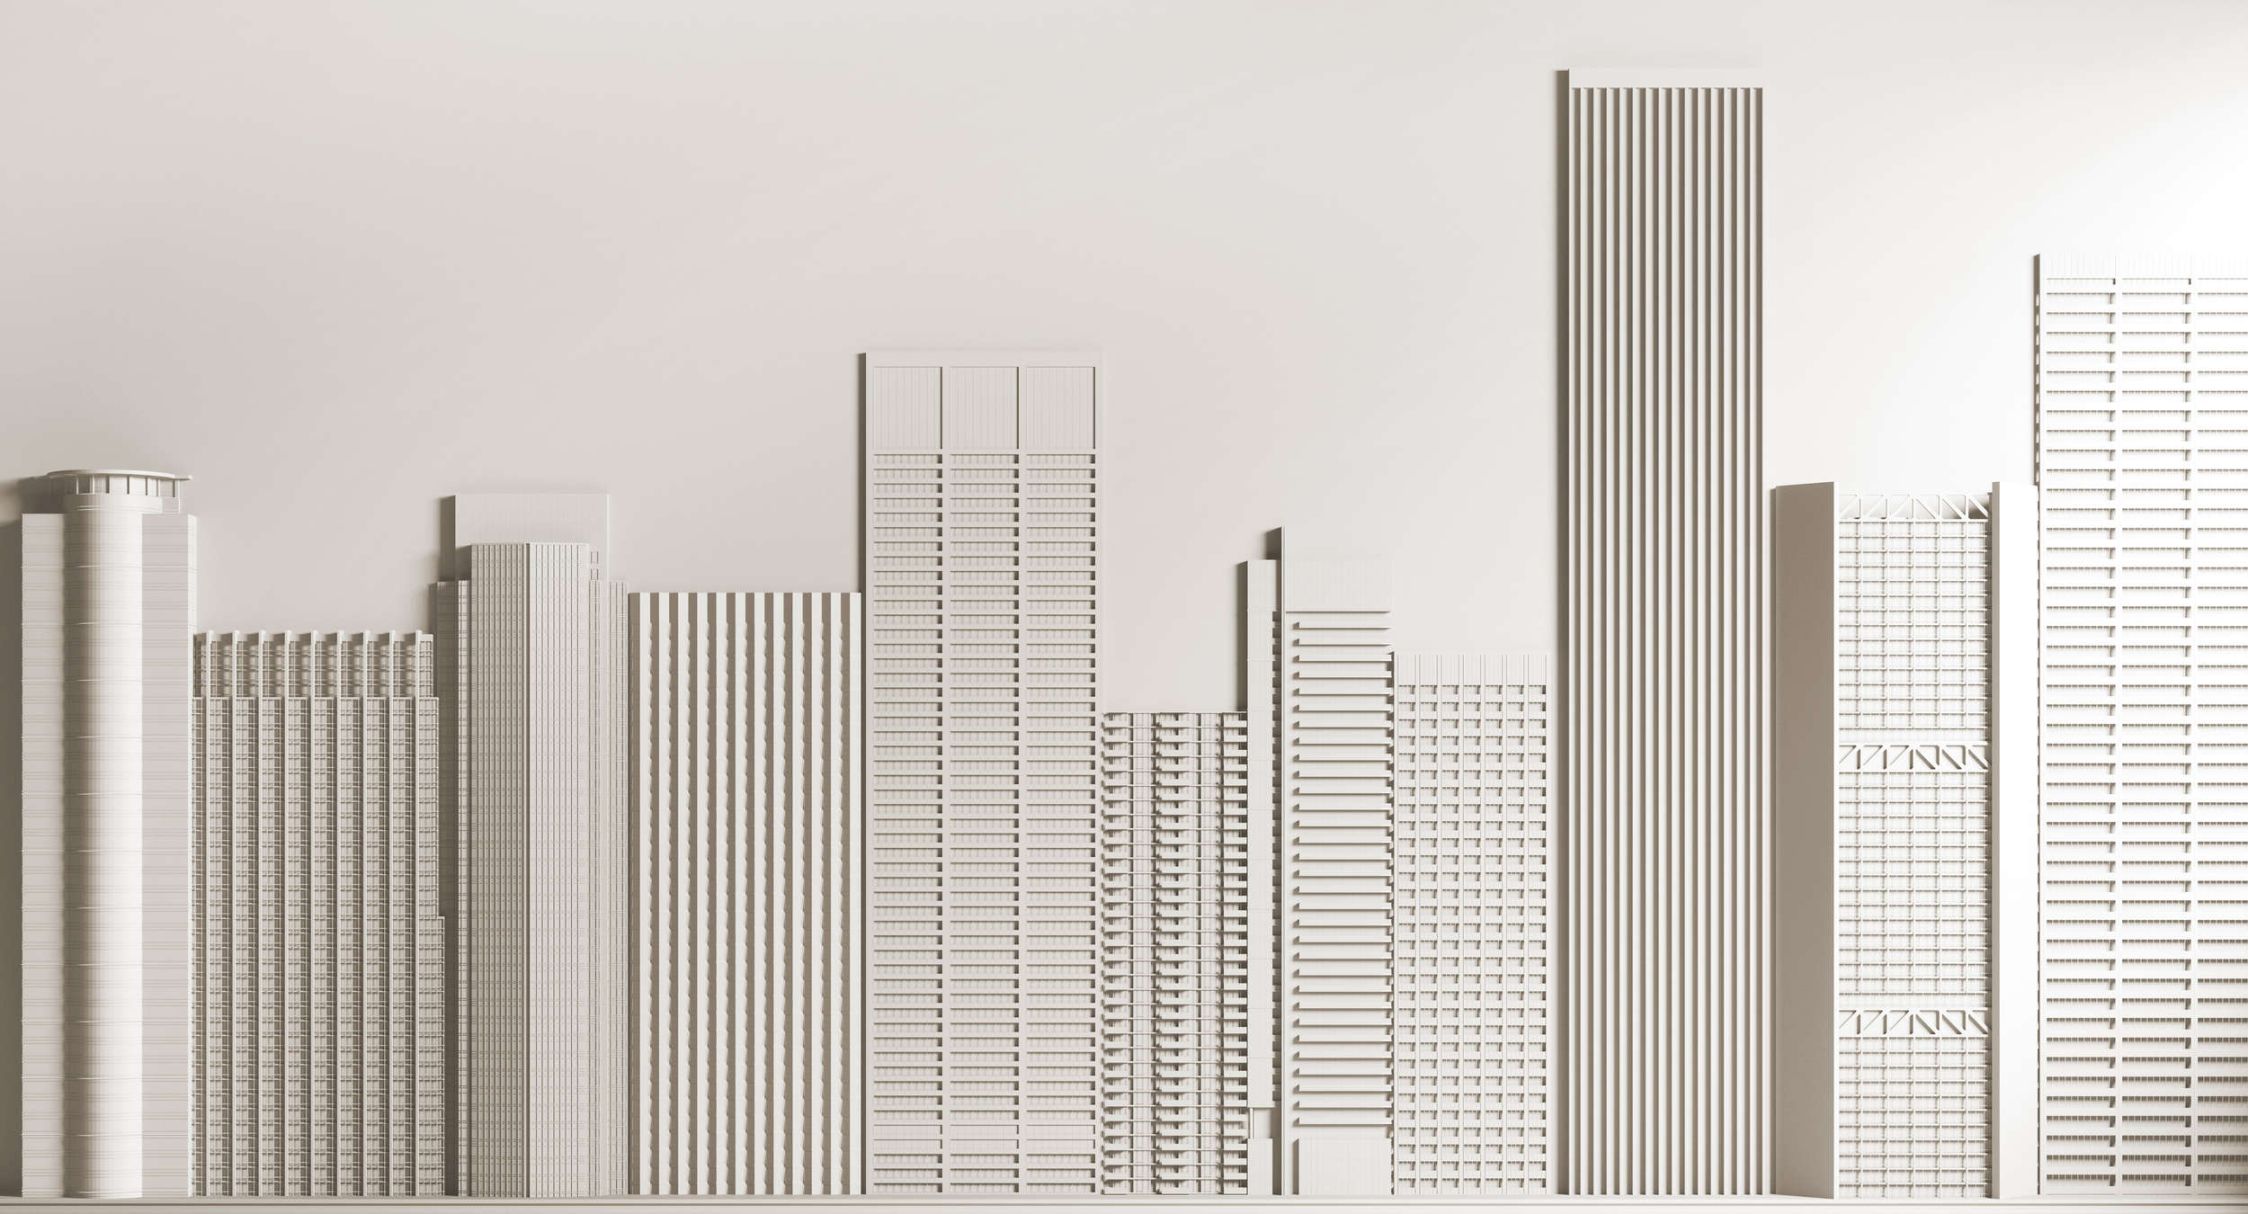             Photo wallpaper »new skyline« - Architecture with skyscrapers - Smooth, slightly shiny premium non-woven fabric
        